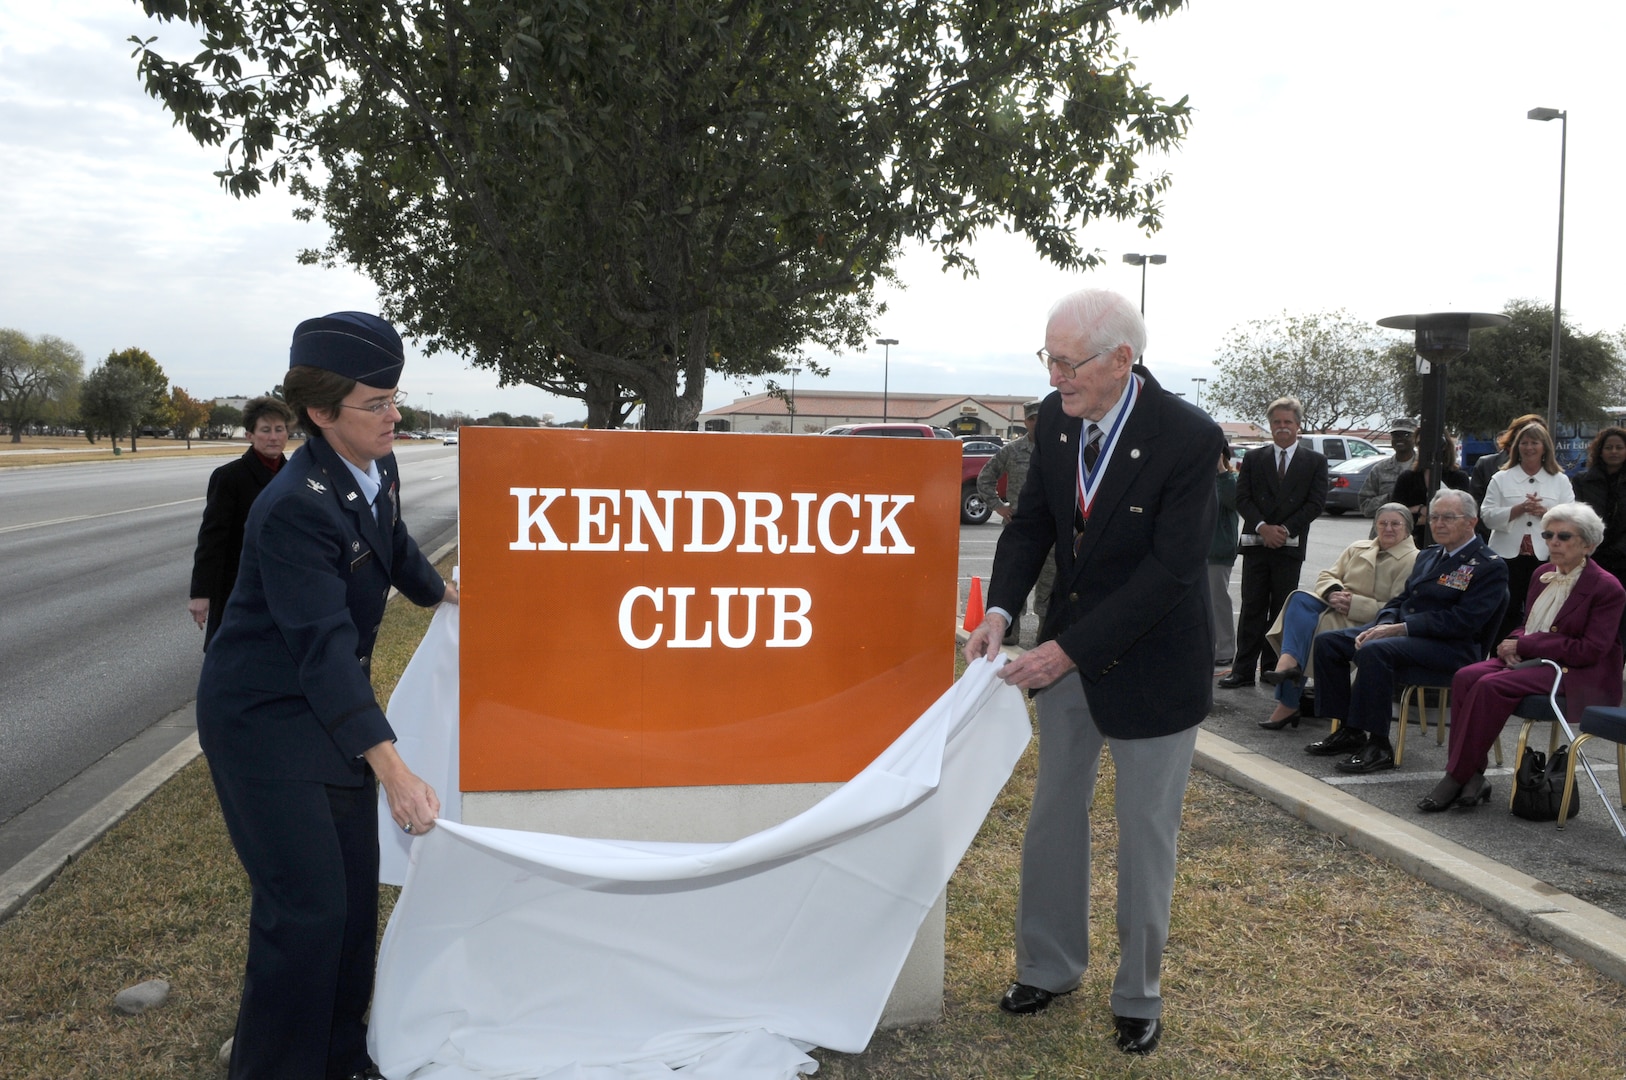 Col. Jacqueline Van Ovost, 12th Flying Training Wing commander, and retired Chief Master Sgt. Guy Kendrick lift the cover off the new enlisted club sign redesignating it the "Kendrick Club." (U.S. Air Force photo by Rich McFadden)